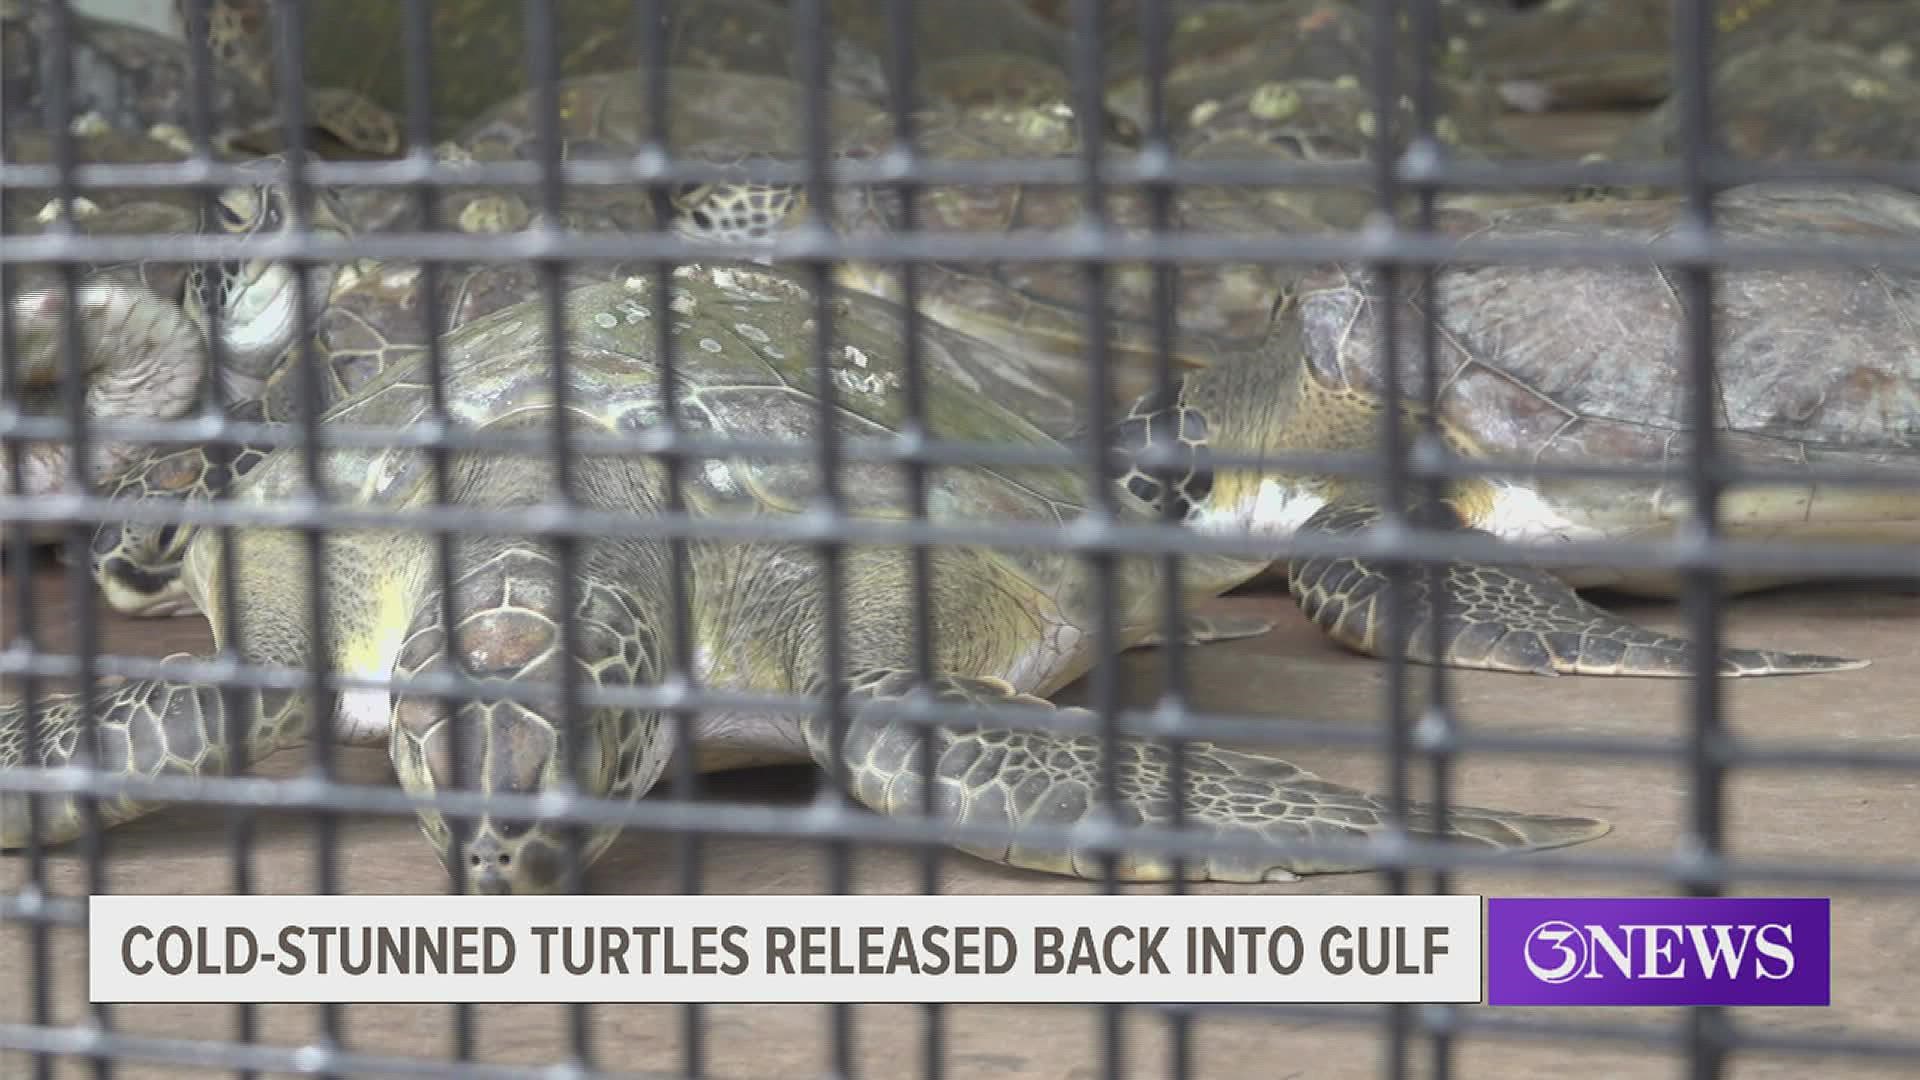 Experts said most sea turtles were stranded in the upper Laguna Madre but others were found in various areas on the Texas coast.